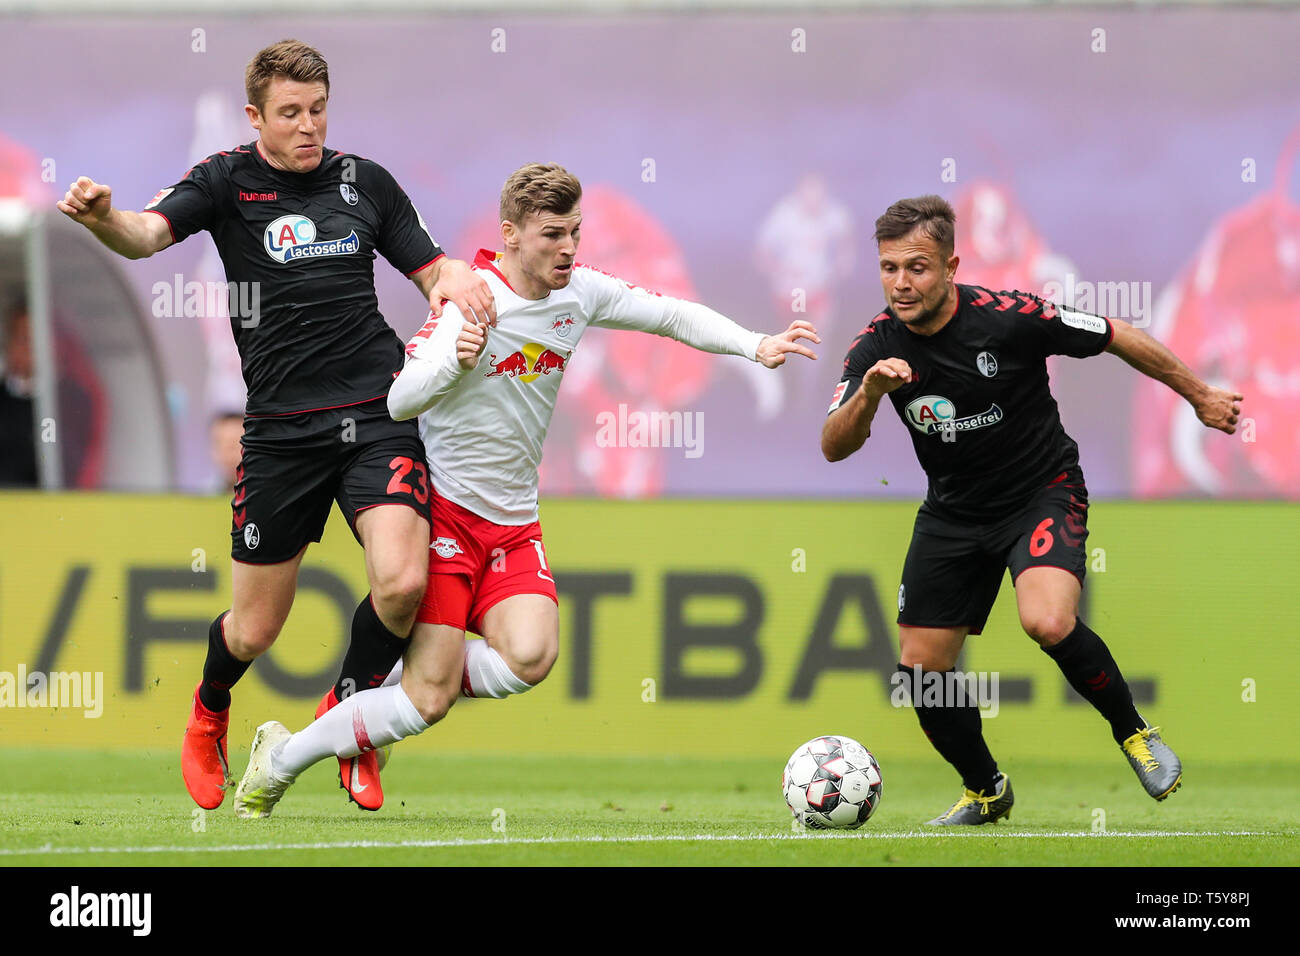 Leipzig, Germany. 27th Apr, 2019. Soccer: Bundesliga, 31st matchday, RB Leipzig - SC Freiburg in der Red-Bull-Arena Leipzig. Leipzig's Timo Werner (M) is stopped rudely by Freiburg's Dominique Heintz (l). Amir Abrashi of Freiburg on the right. Credit: Jan Woitas/dpa-Zentralbild/dpa - IMPORTANT NOTE: In accordance with the requirements of the DFL Deutsche Fußball Liga or the DFB Deutscher Fußball-Bund, it is prohibited to use or have used photographs taken in the stadium and/or the match in the form of sequence images and/or video-like photo sequences./dpa/Alamy Live News Stock Photo